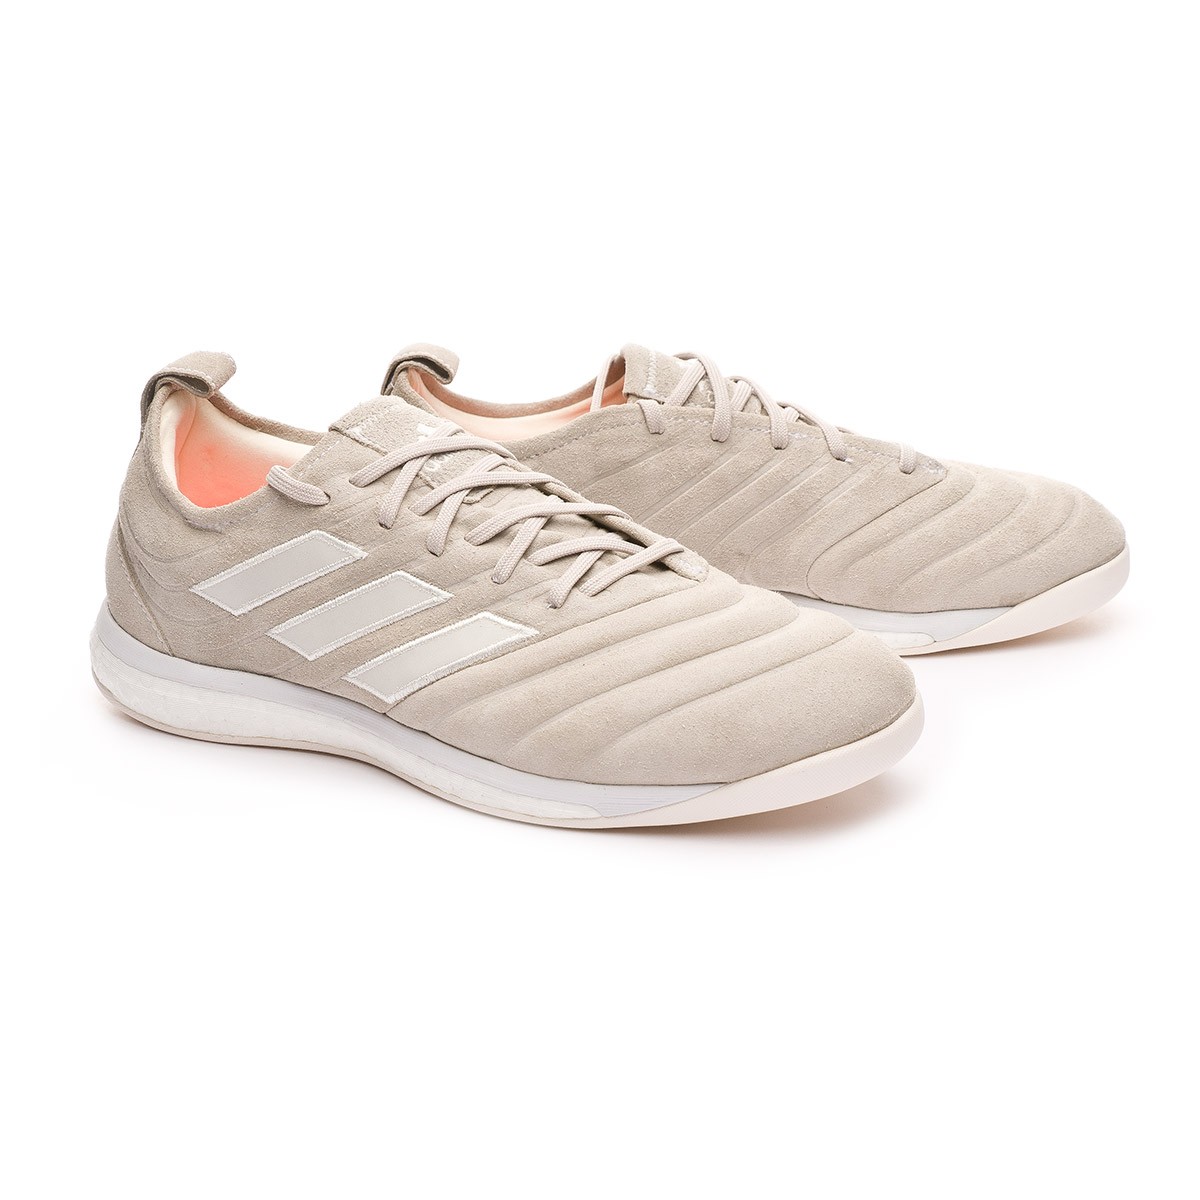 Trainers adidas Copa Tango 19+ TR Off 